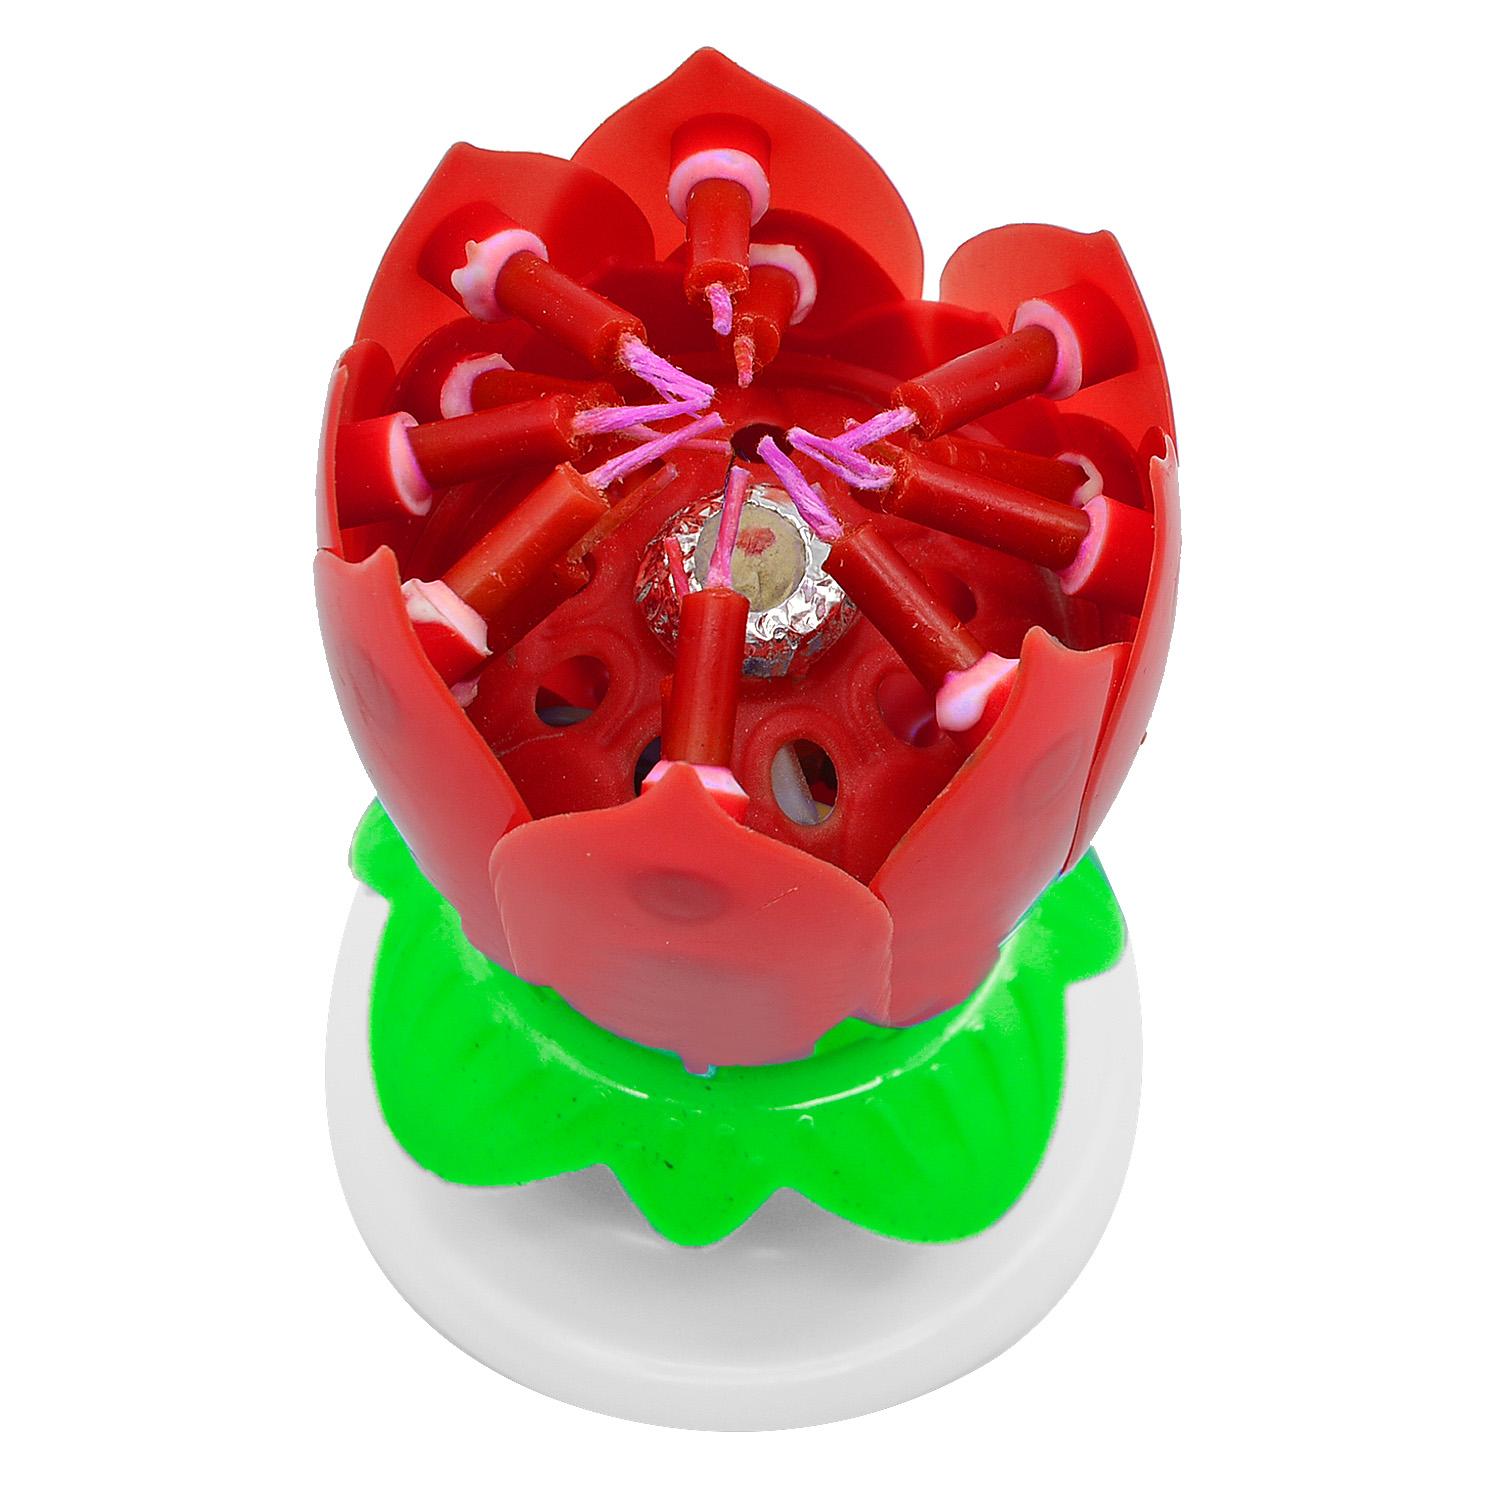 Flower Shaped 2-Layer 14-Candle Birthday Electric Music Paraffin Candle Flaming Flower Candle Red - intl